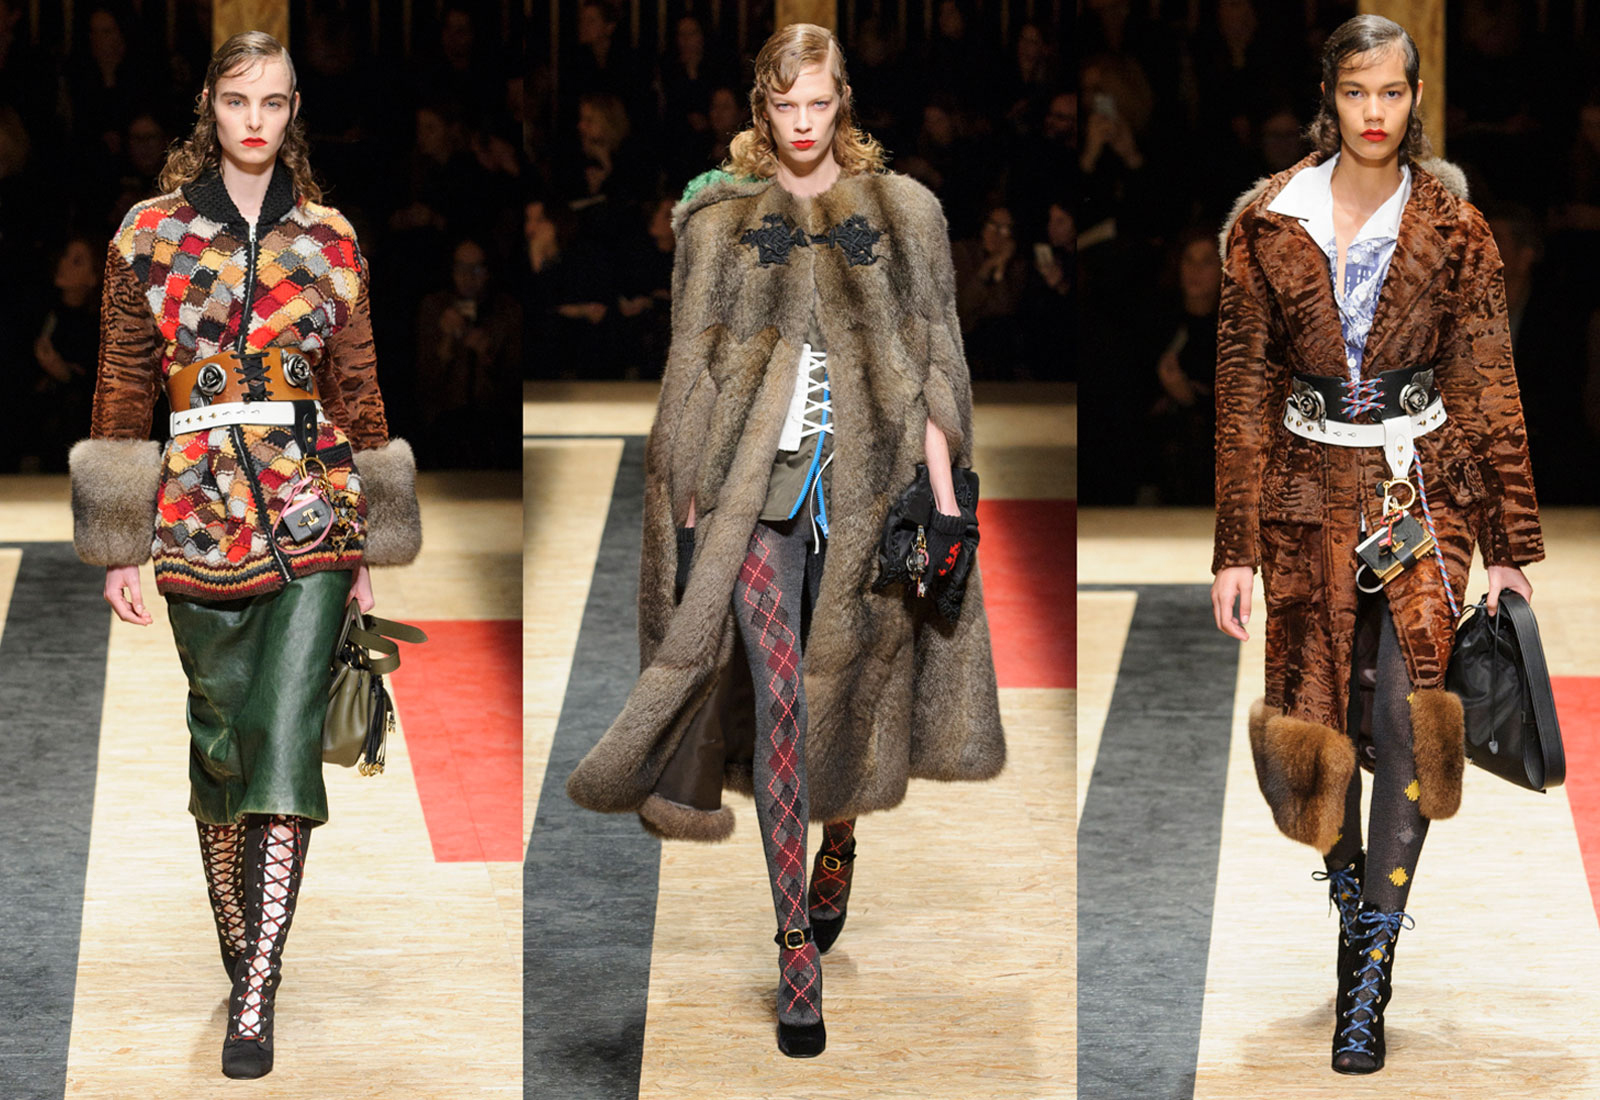 Fashion House Prada To Stop Using Fur from 2020 - Arts & Collections